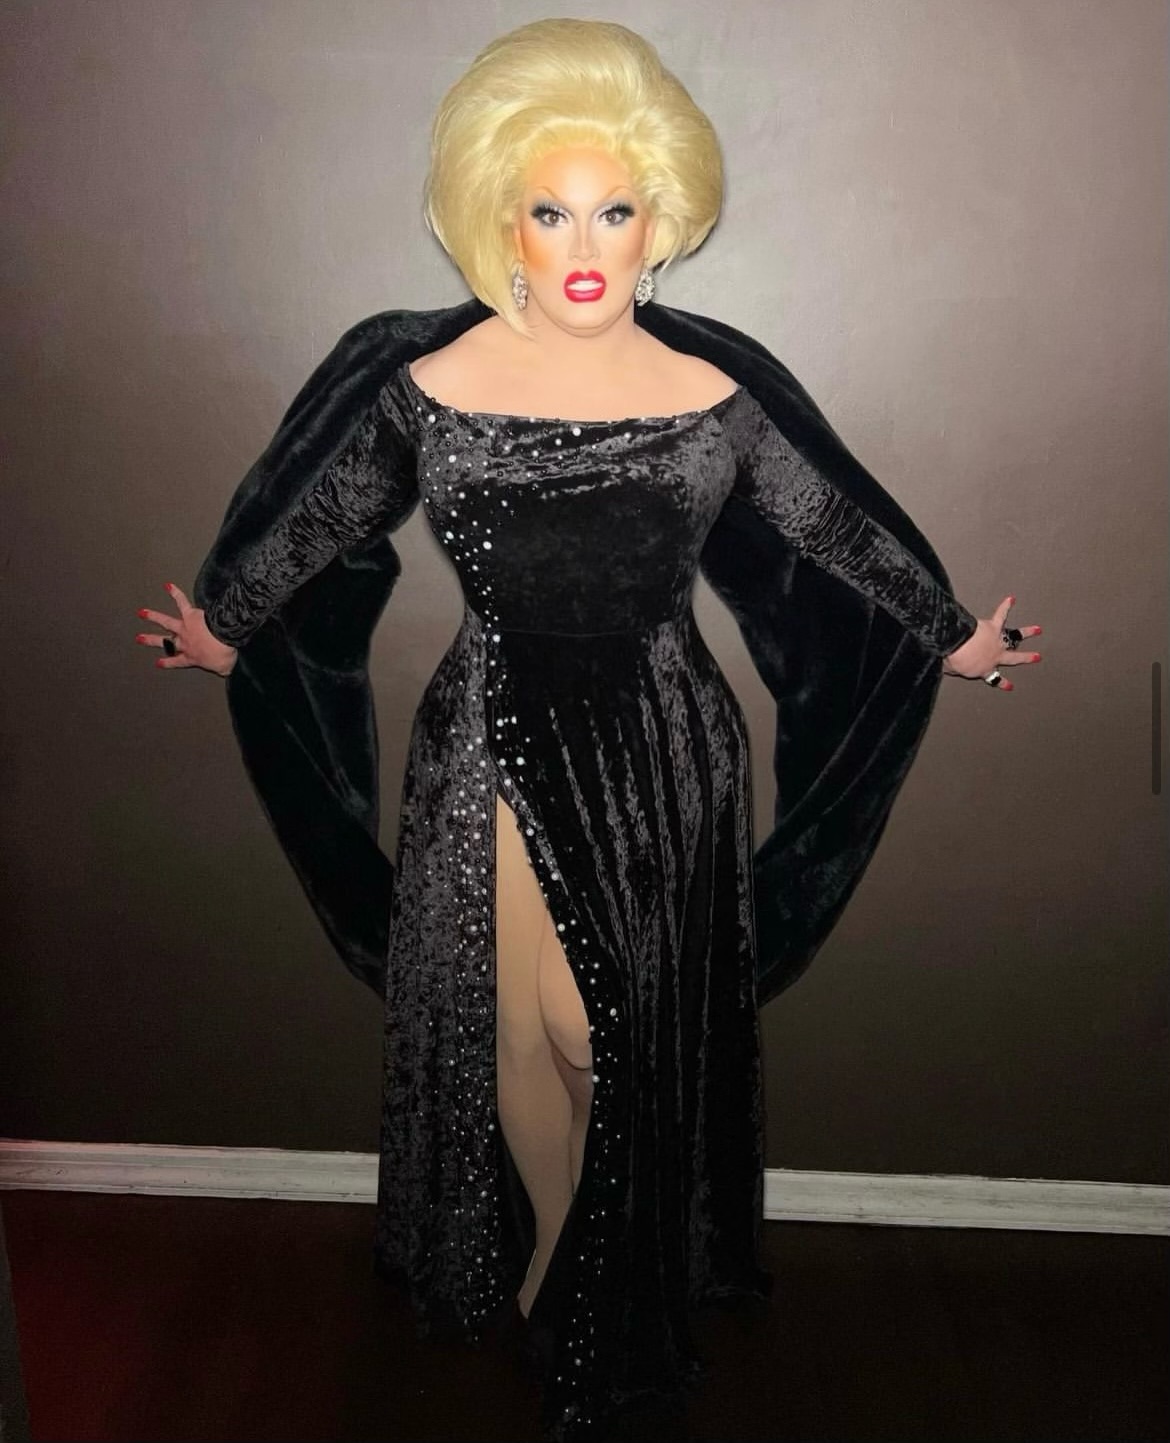  Drag Queen of the Month – Pissi Myles